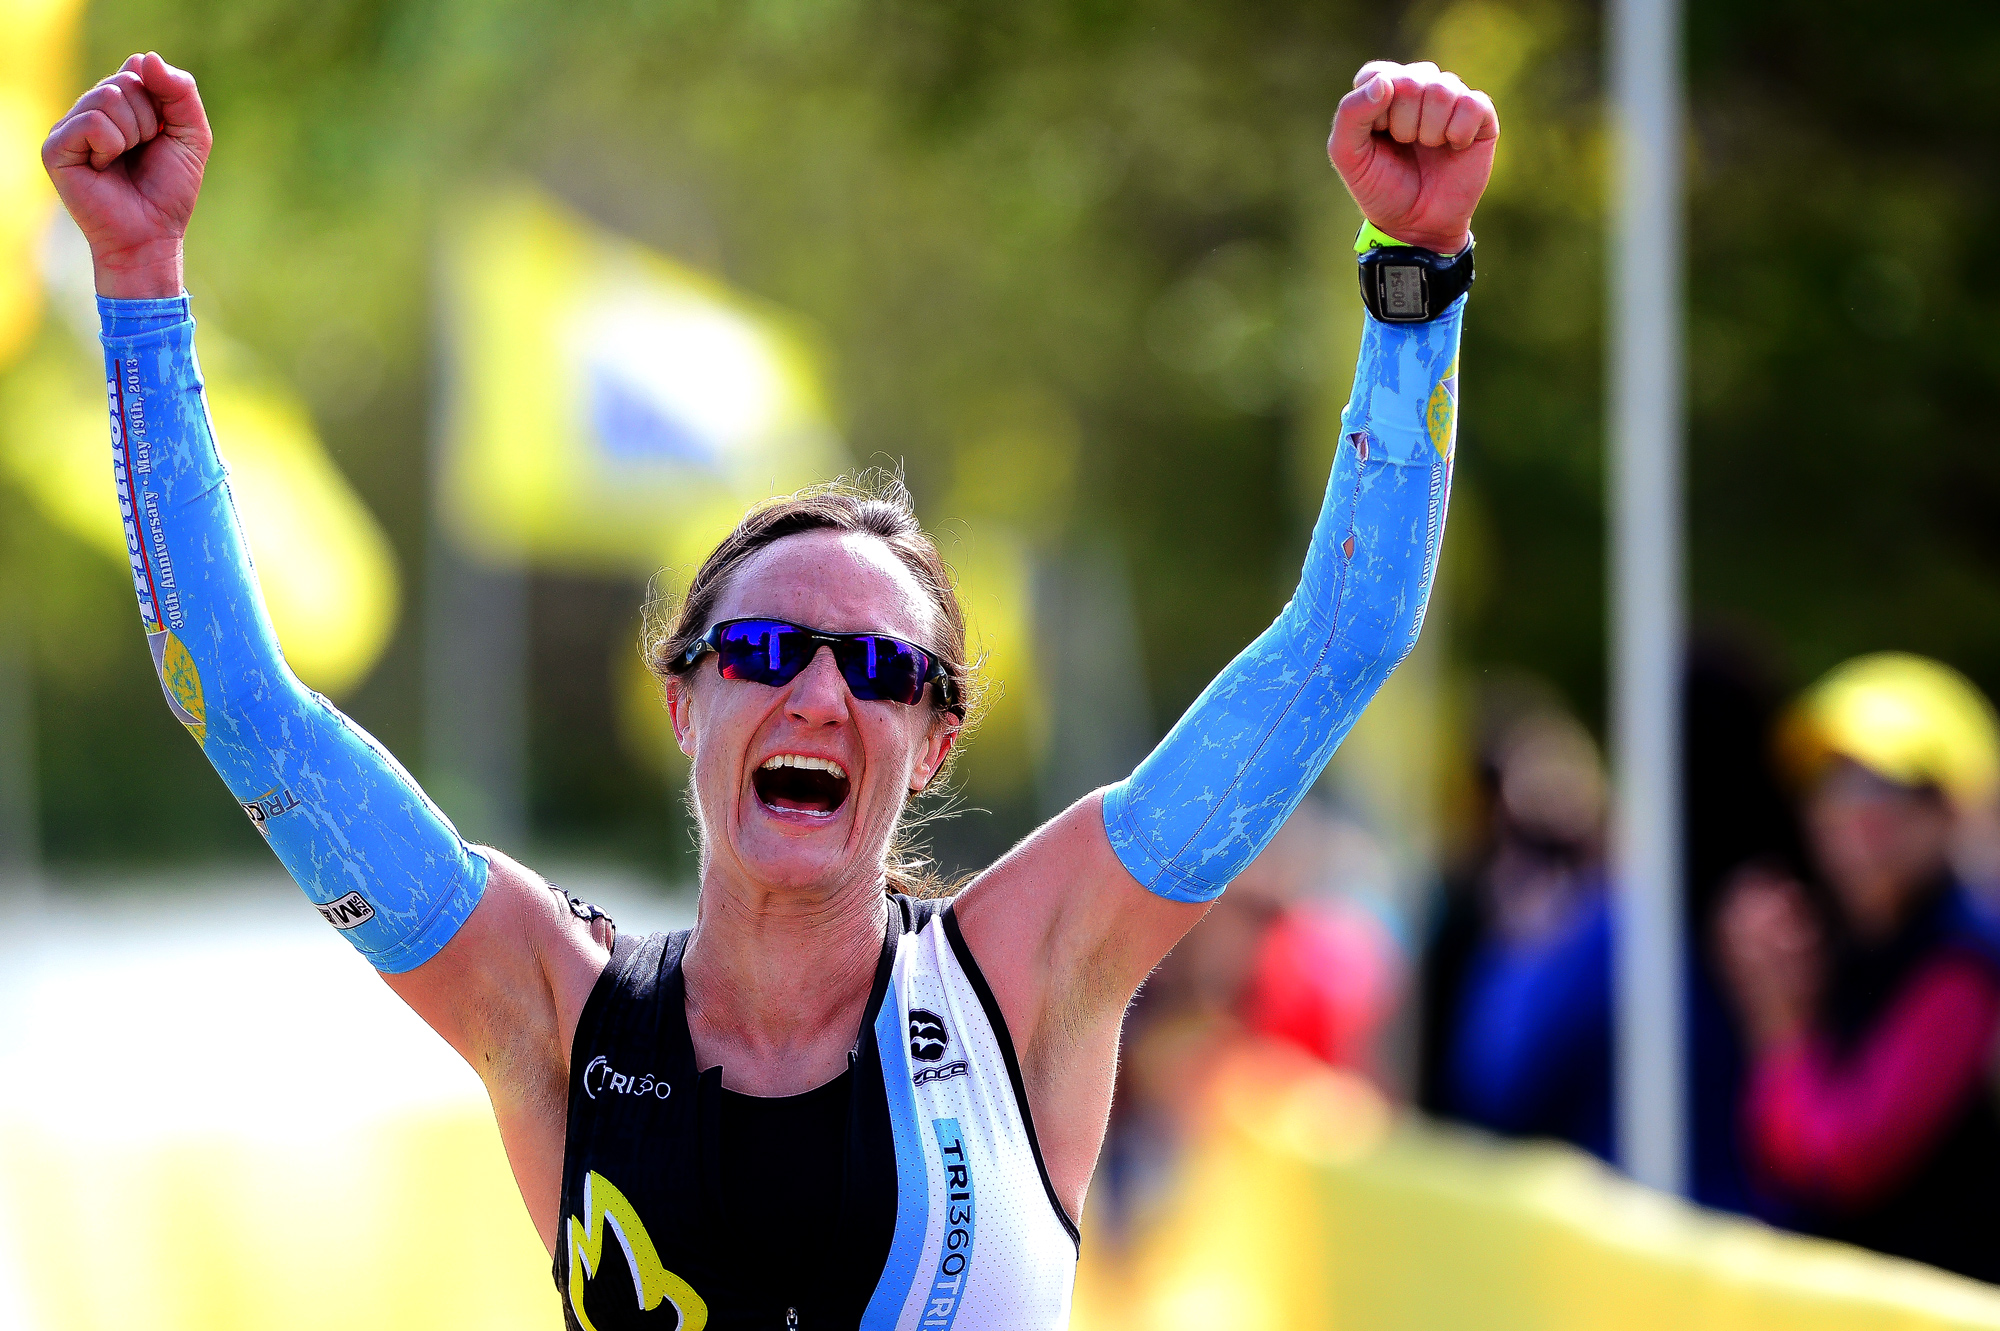  Kyra Wiens of Alexandria, Virginia celebrates after finishing third overall during the 31st annual Columbia Triathlon at Centennial Park in Ellicott City, Maryland on May 18, 2014. 